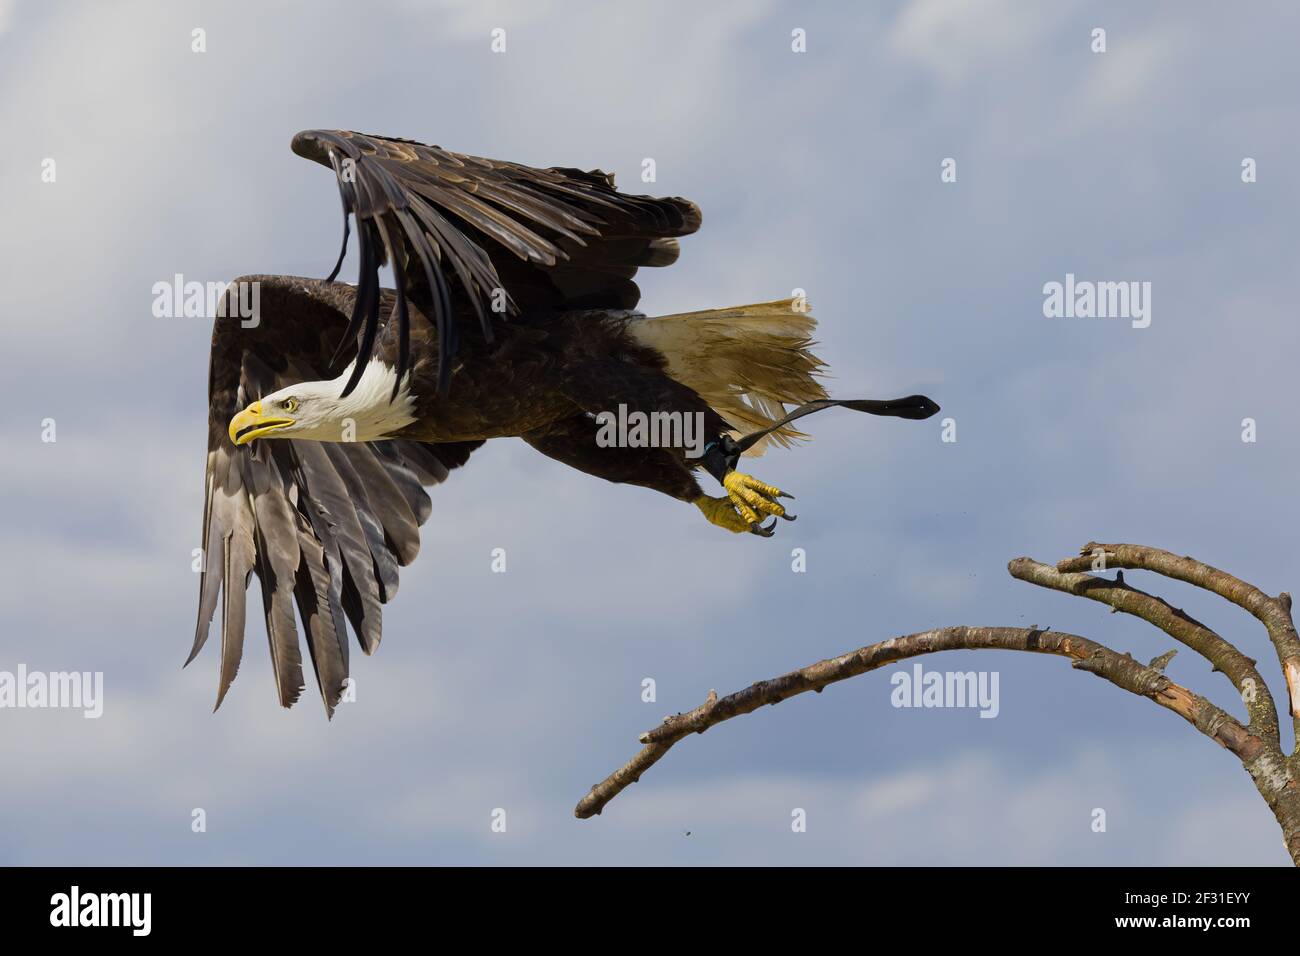 A bald eagle is flying off from a branch Stock Photo